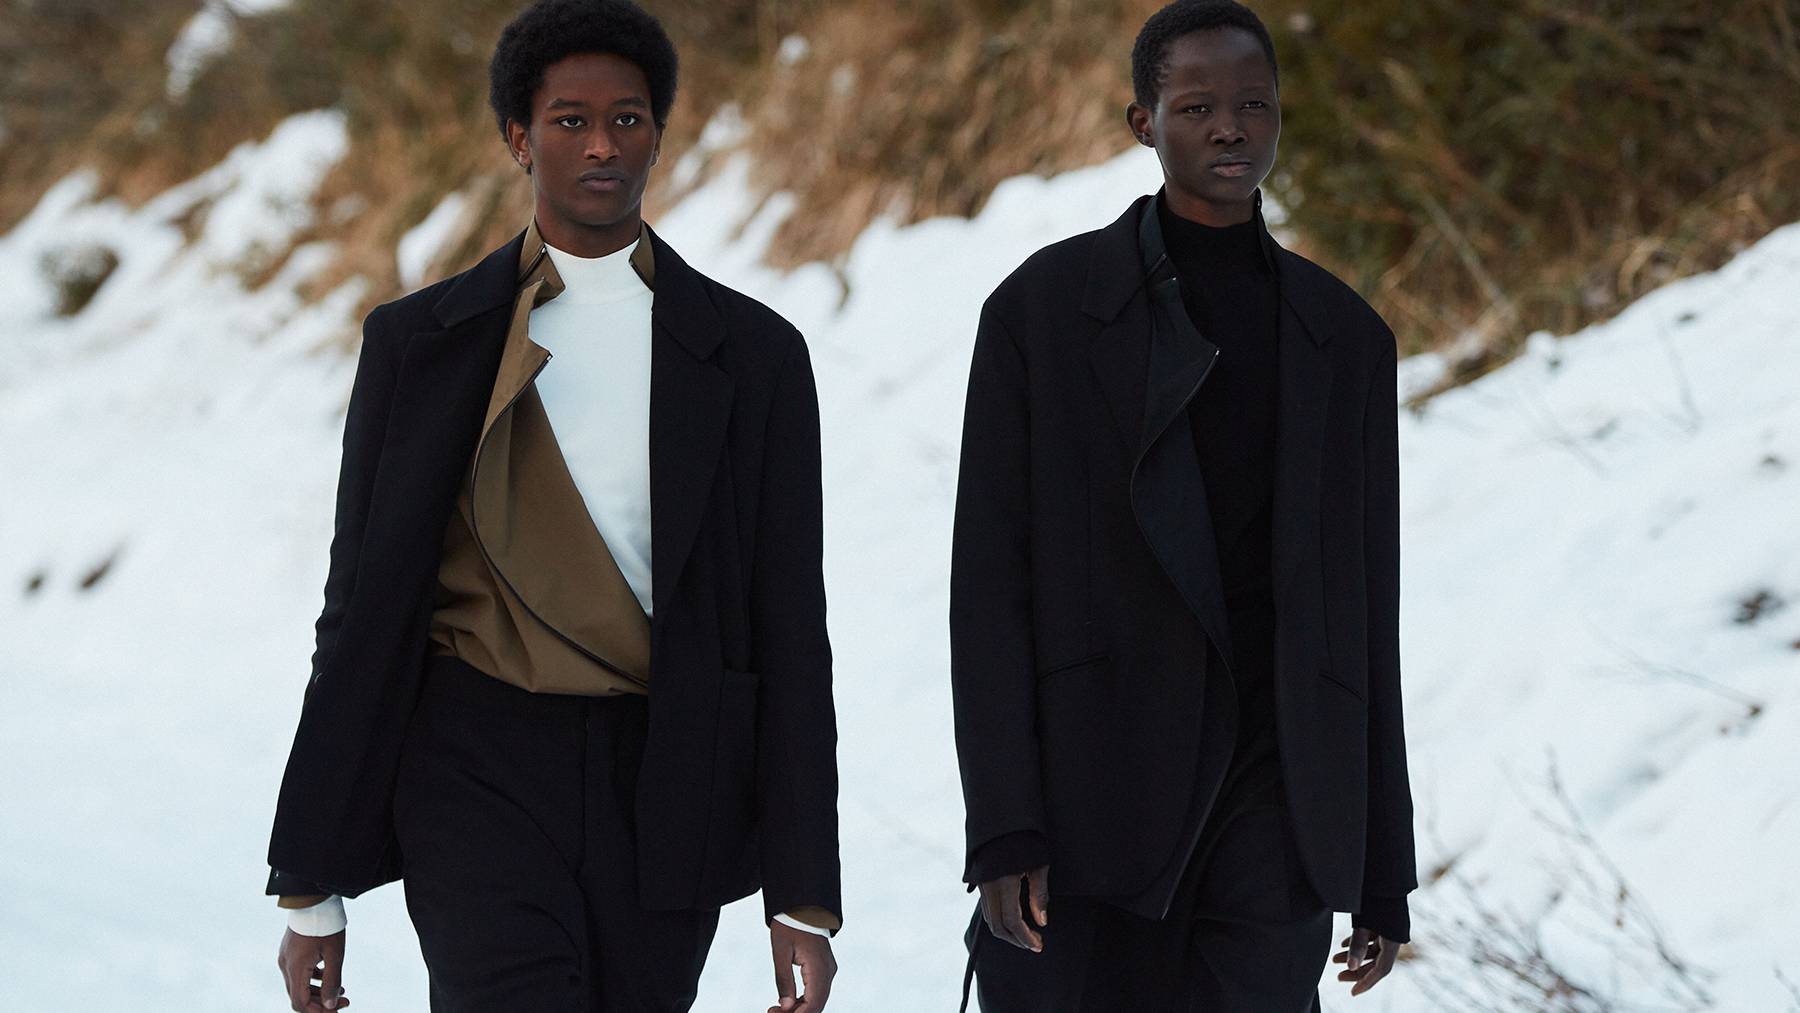 Zegna show featuring two models